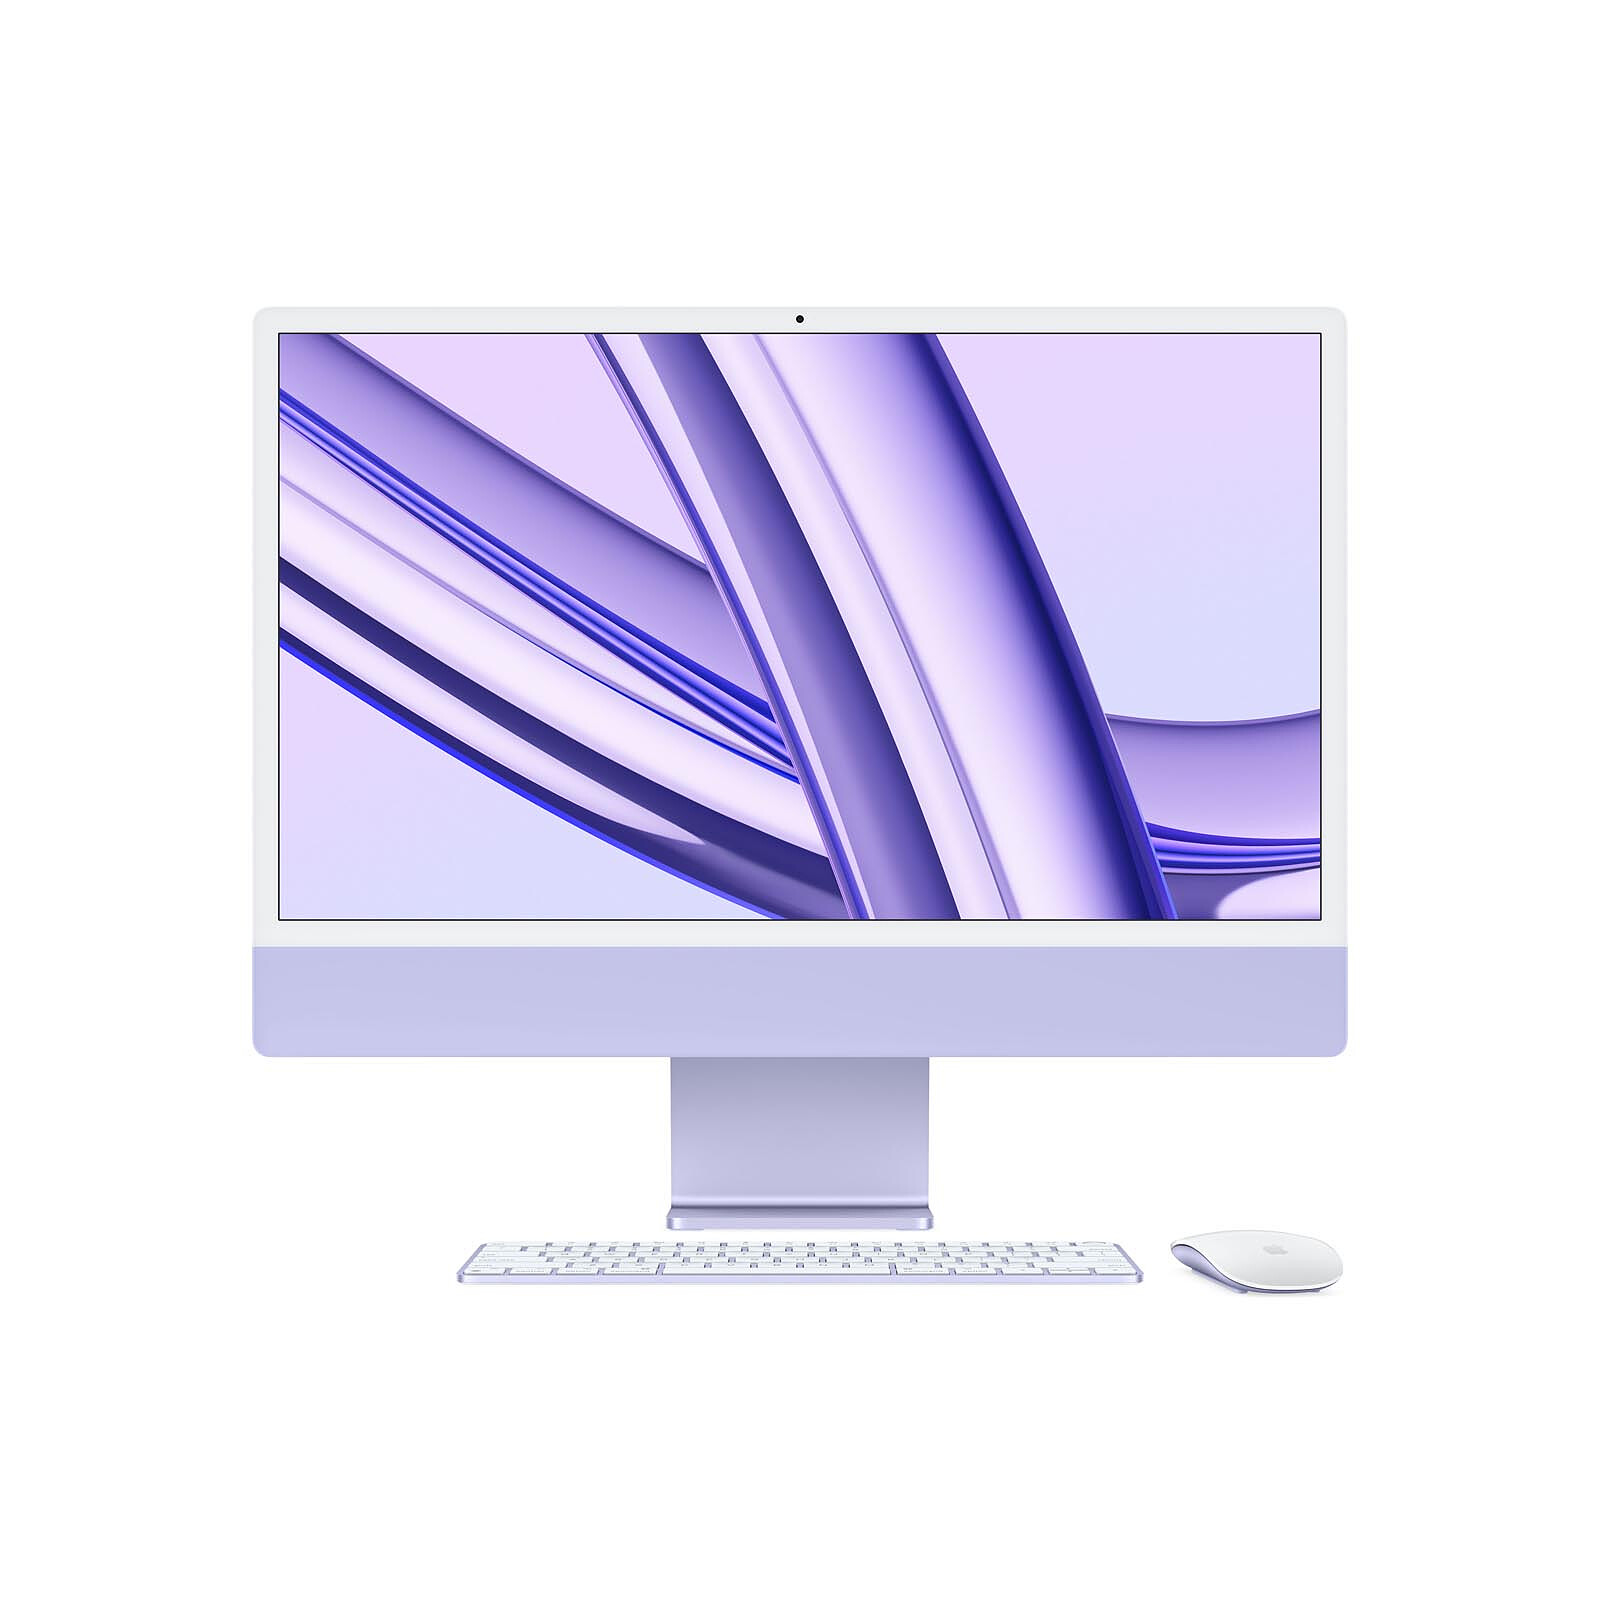  Apple 2021 iMac All in one Desktop Computer with M1 chip:  8-core CPU, 7-core GPU, 24-inch Retina Display, 8GB RAM, 256GB SSD Storage,  Matching Accessories. Works with iPhone/iPad; Green : Electronics